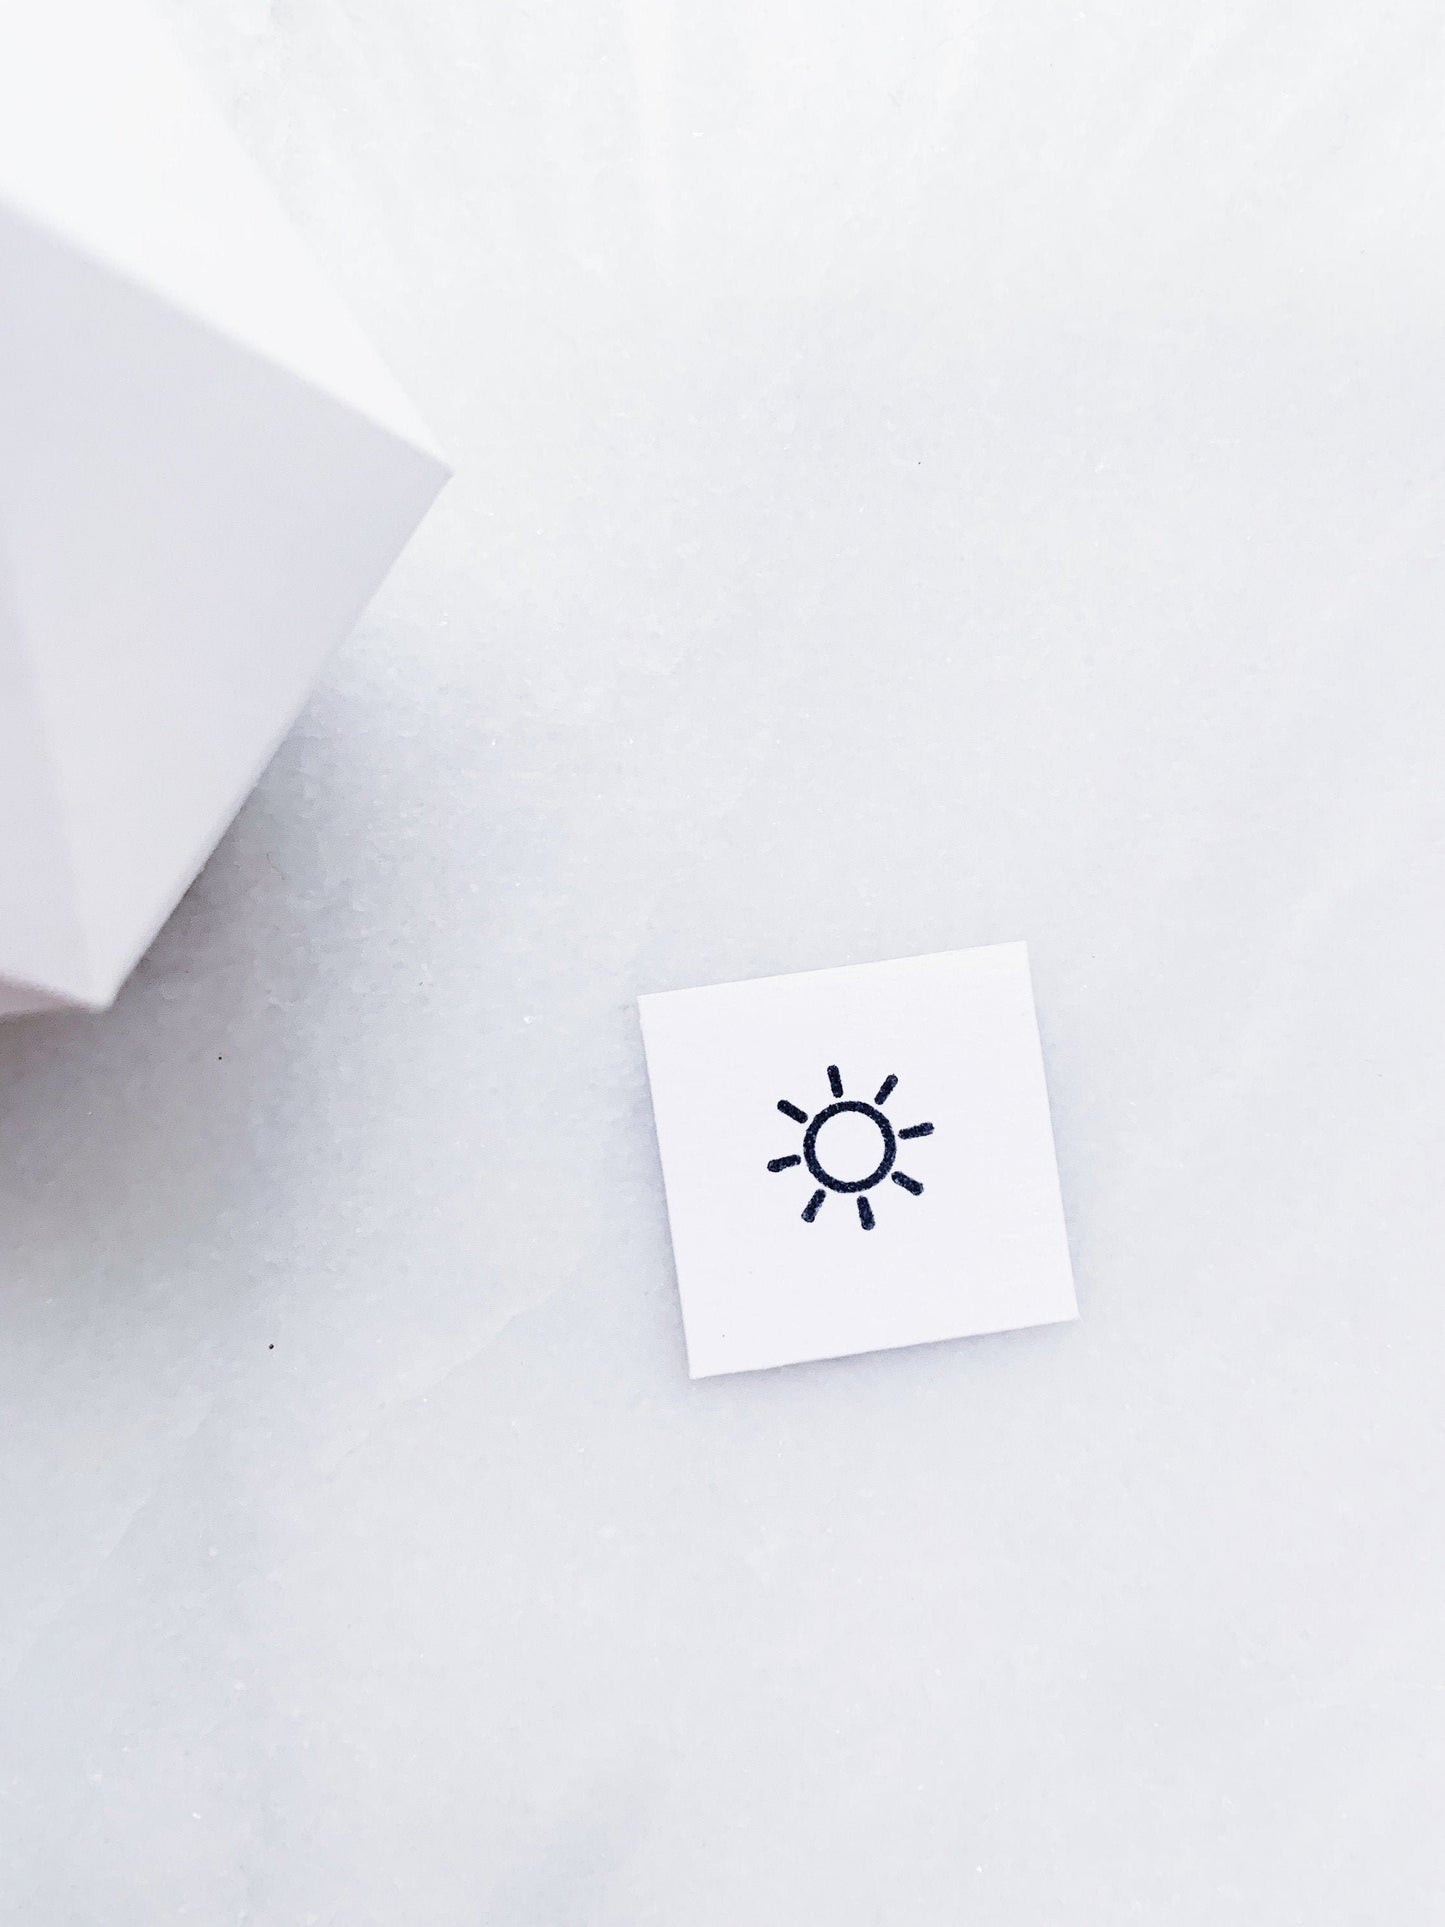 Small Sun Rubber Stamp • Sunny Weather Stamp for Journals • Weather Stamp for Calendars and Planners